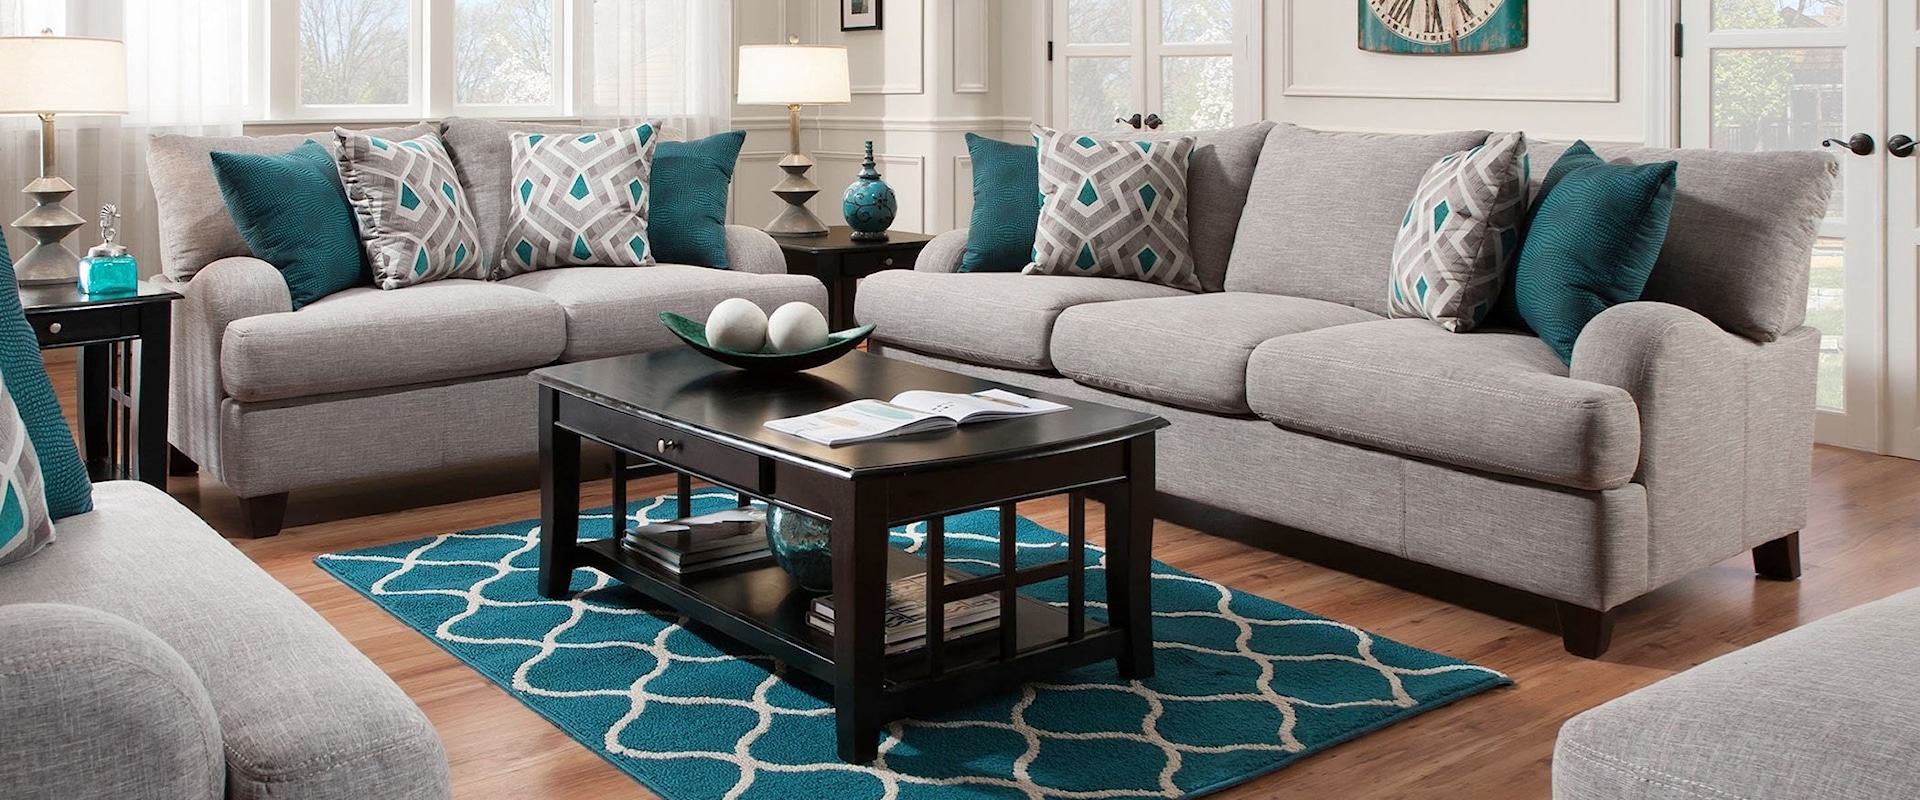 Transitional 2-Piece Living Room Group